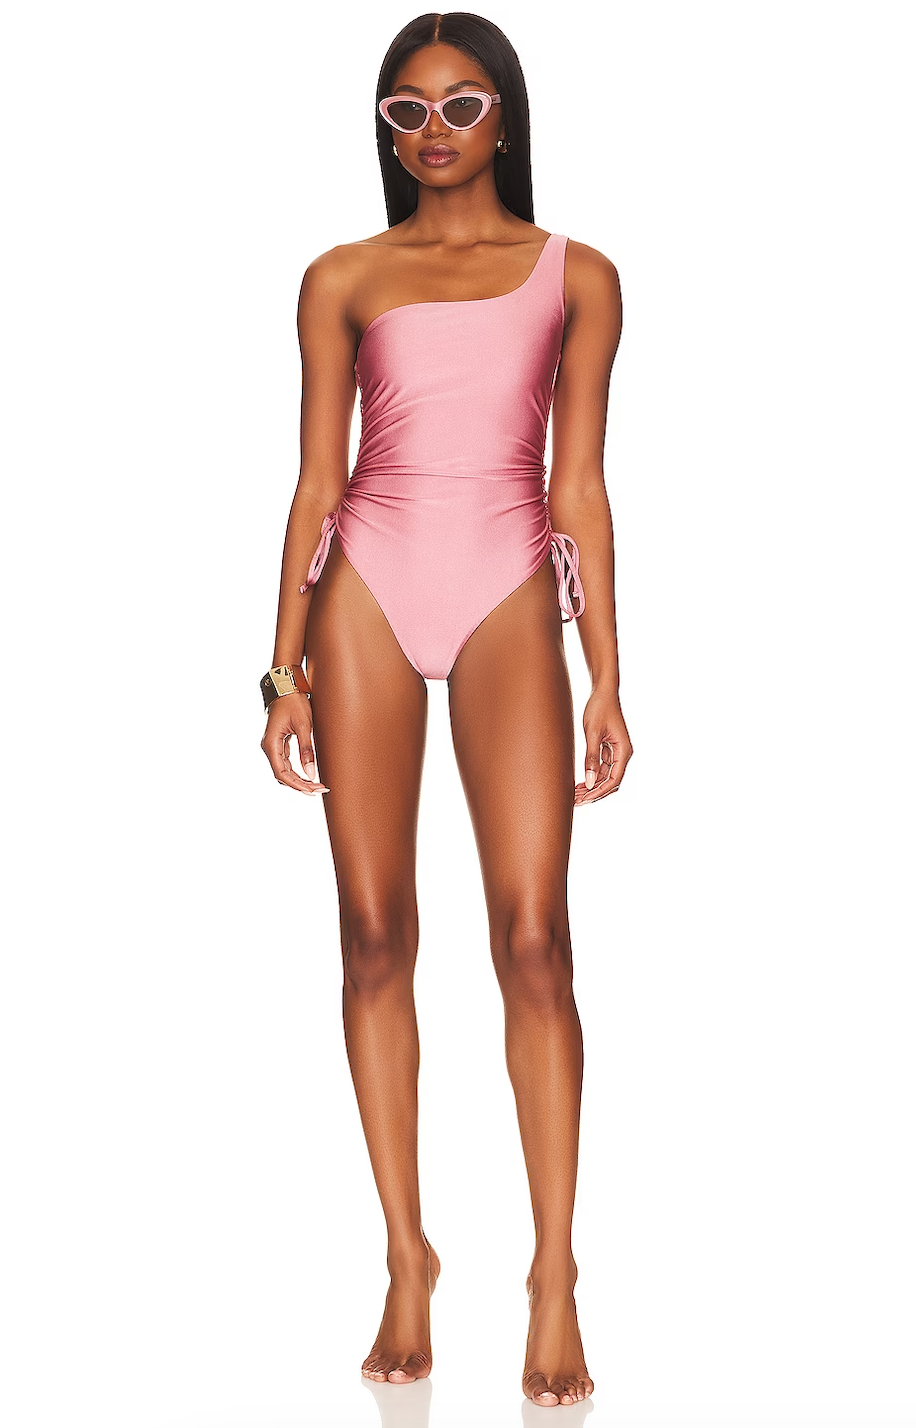 Summer Swimsuit Trends: Embrace Style and Confidence